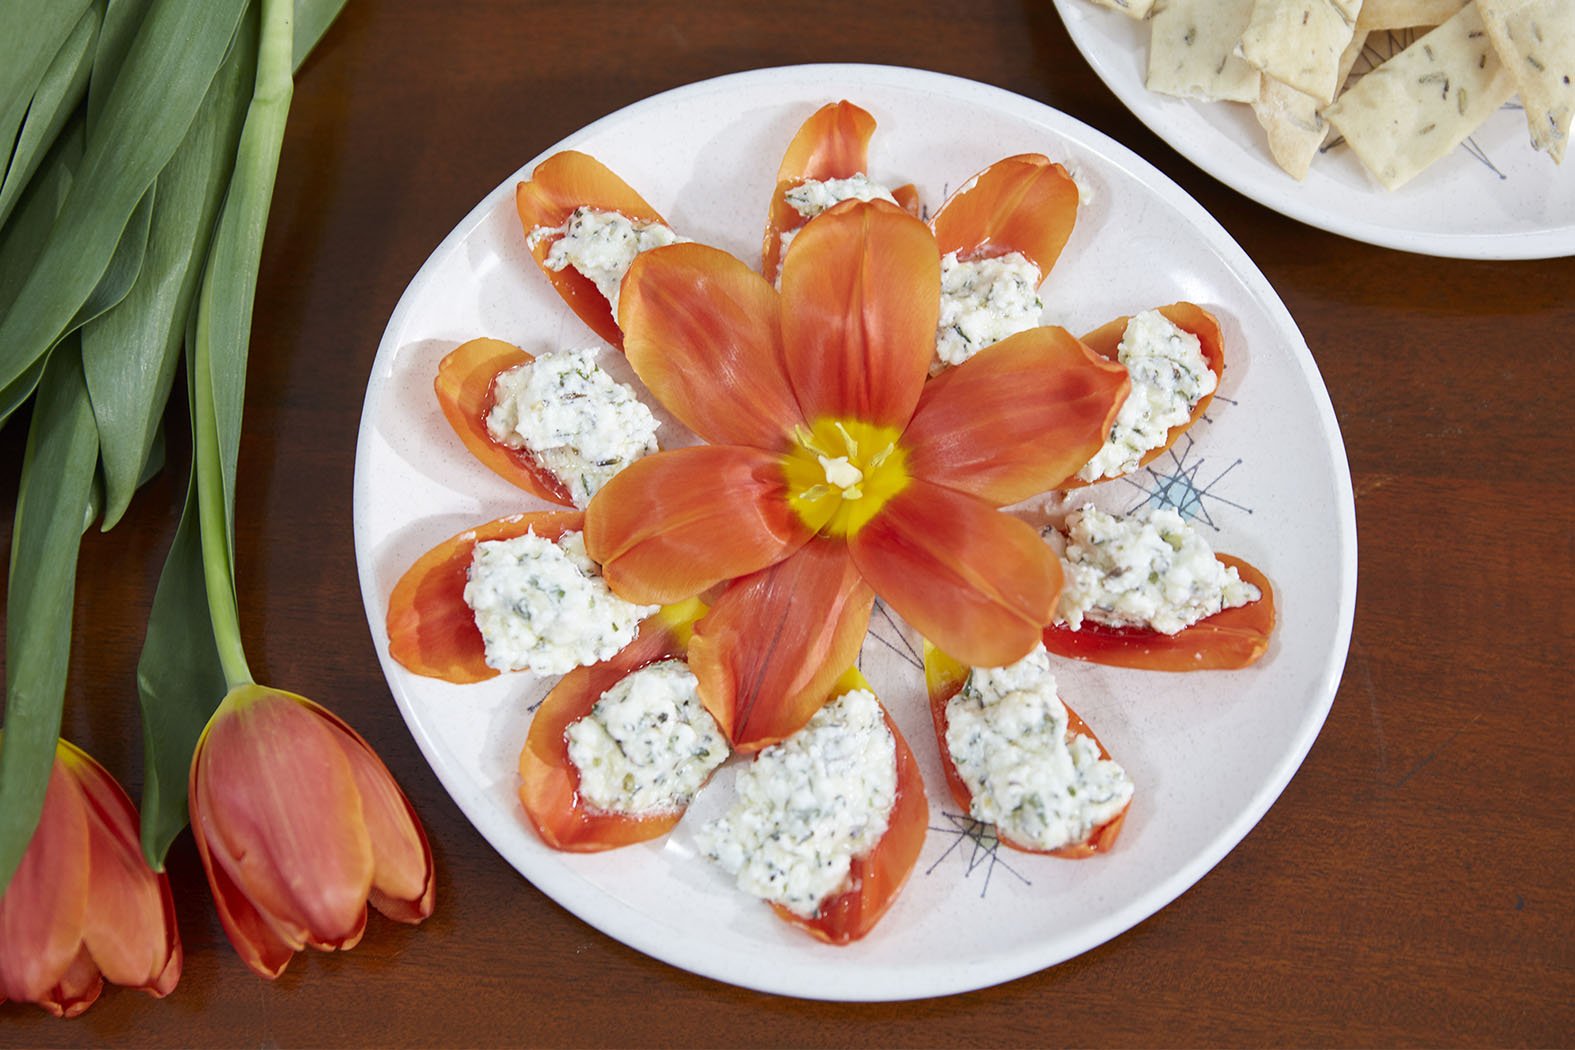 Flower Inspired Recipes or Flower Cocktails are included each week- on “J Schwanke’s Life in Bloom”, featured here is Herb Infused Goat Cheese served on Organic Tulip Petals.